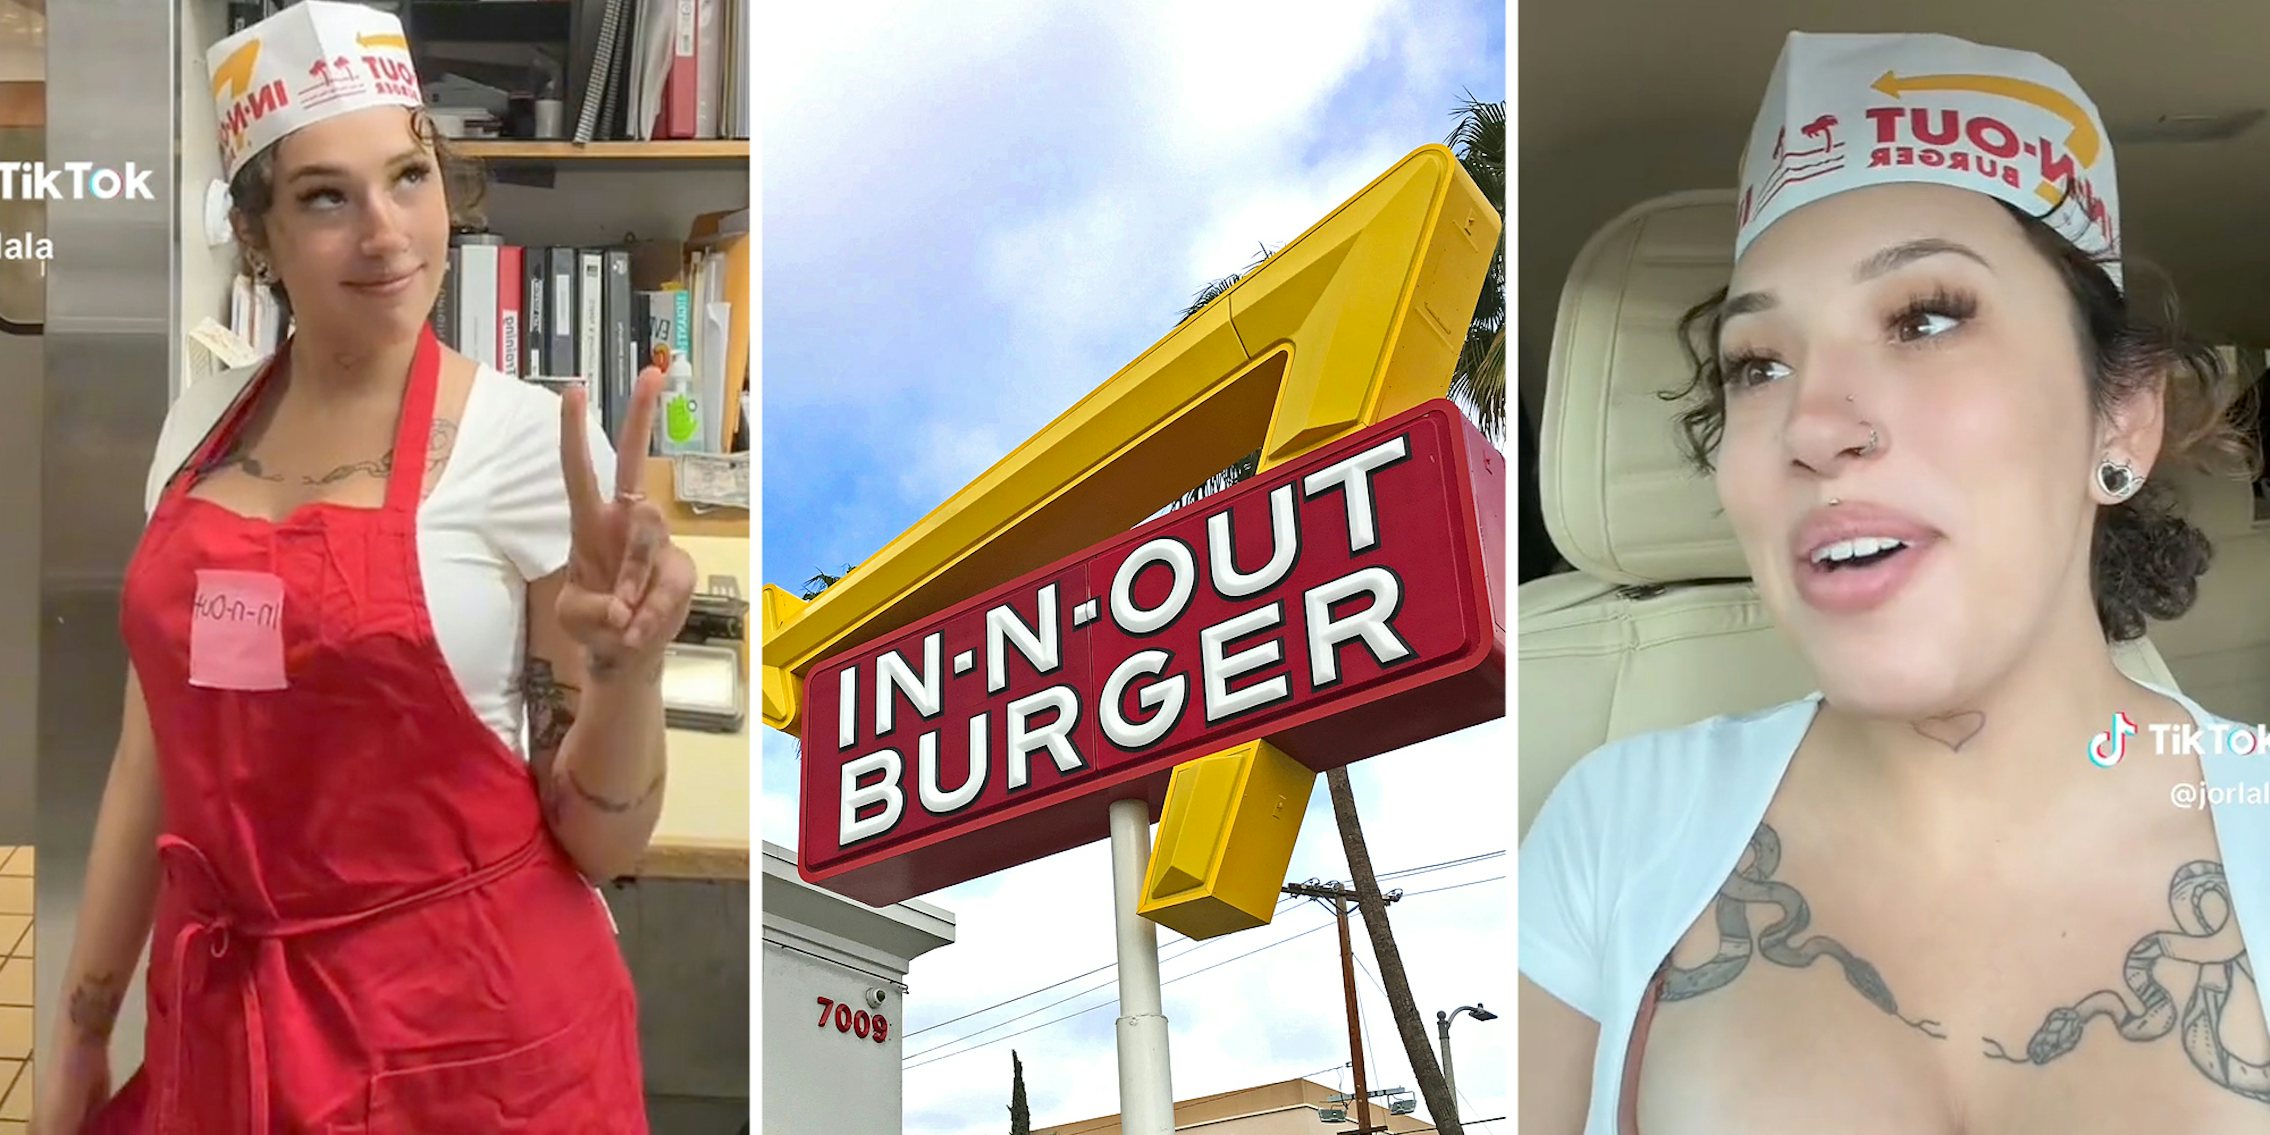 Woman in In-n-Out costume(l), In-n-out Burger sign(c), Same woman talking(r)